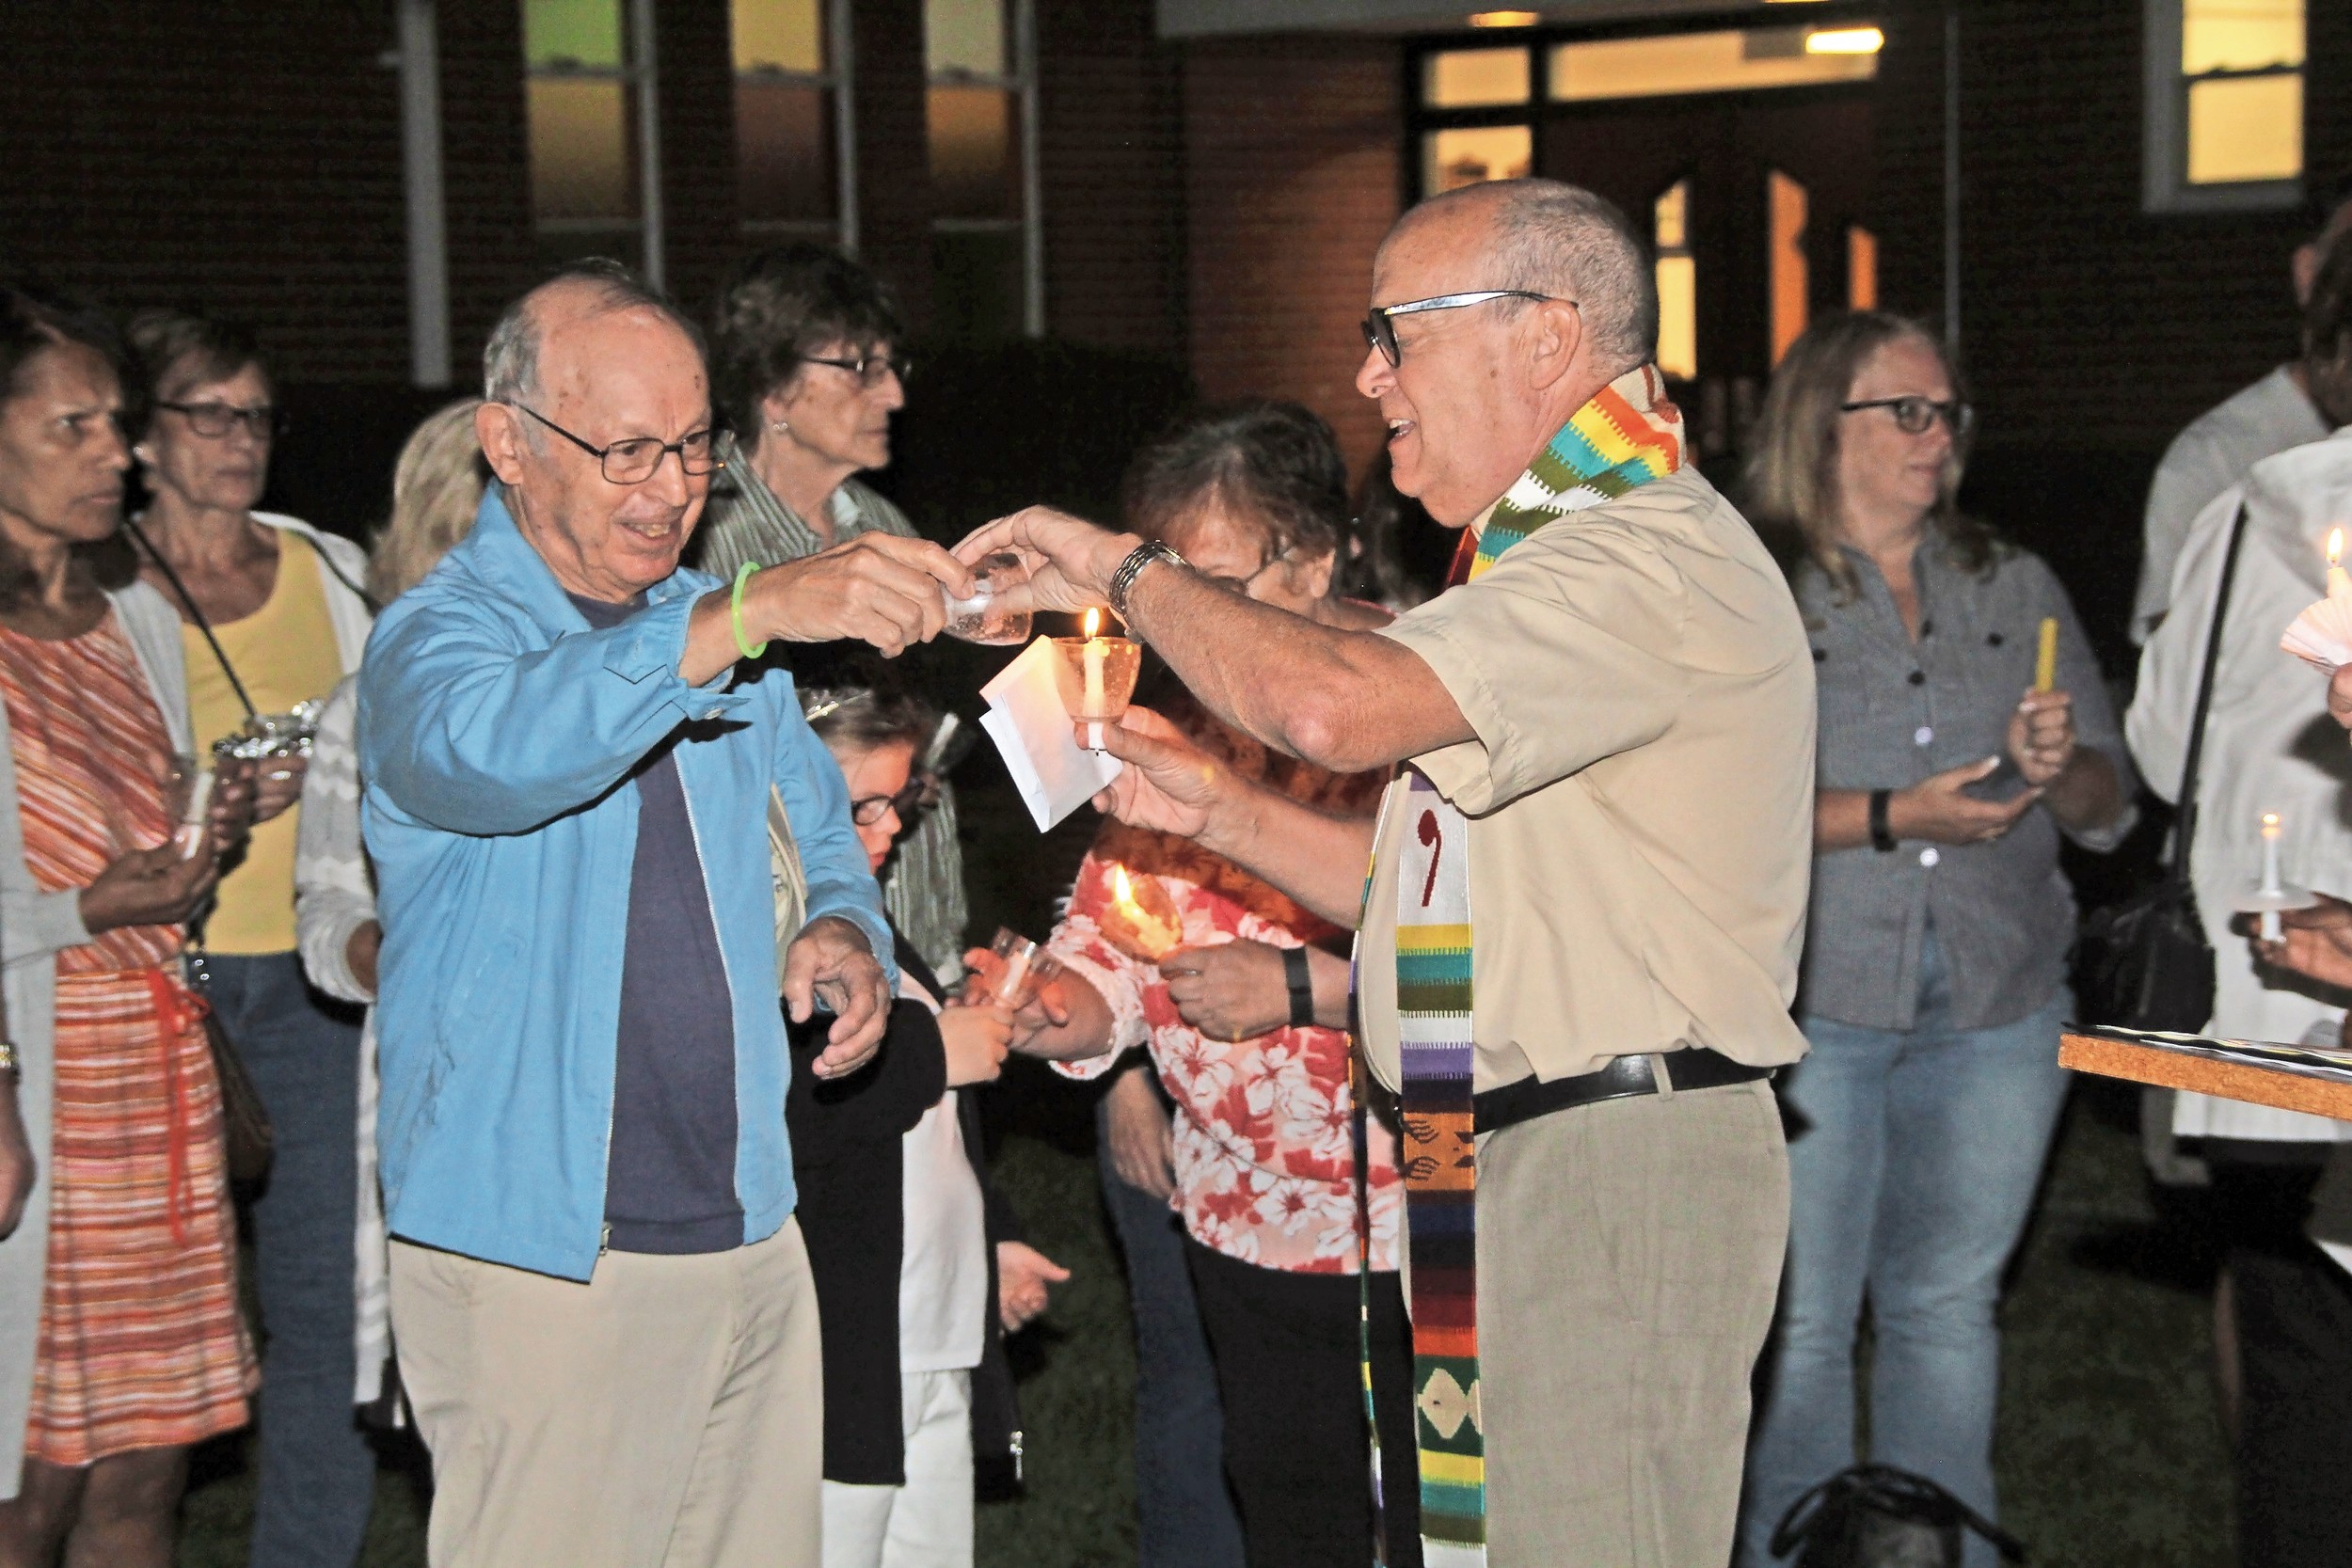 The Rev. Ron Garner, right, pastor of Wantagh Memorial Congregational, lit residents’ candles using one flame to show that the community is united.